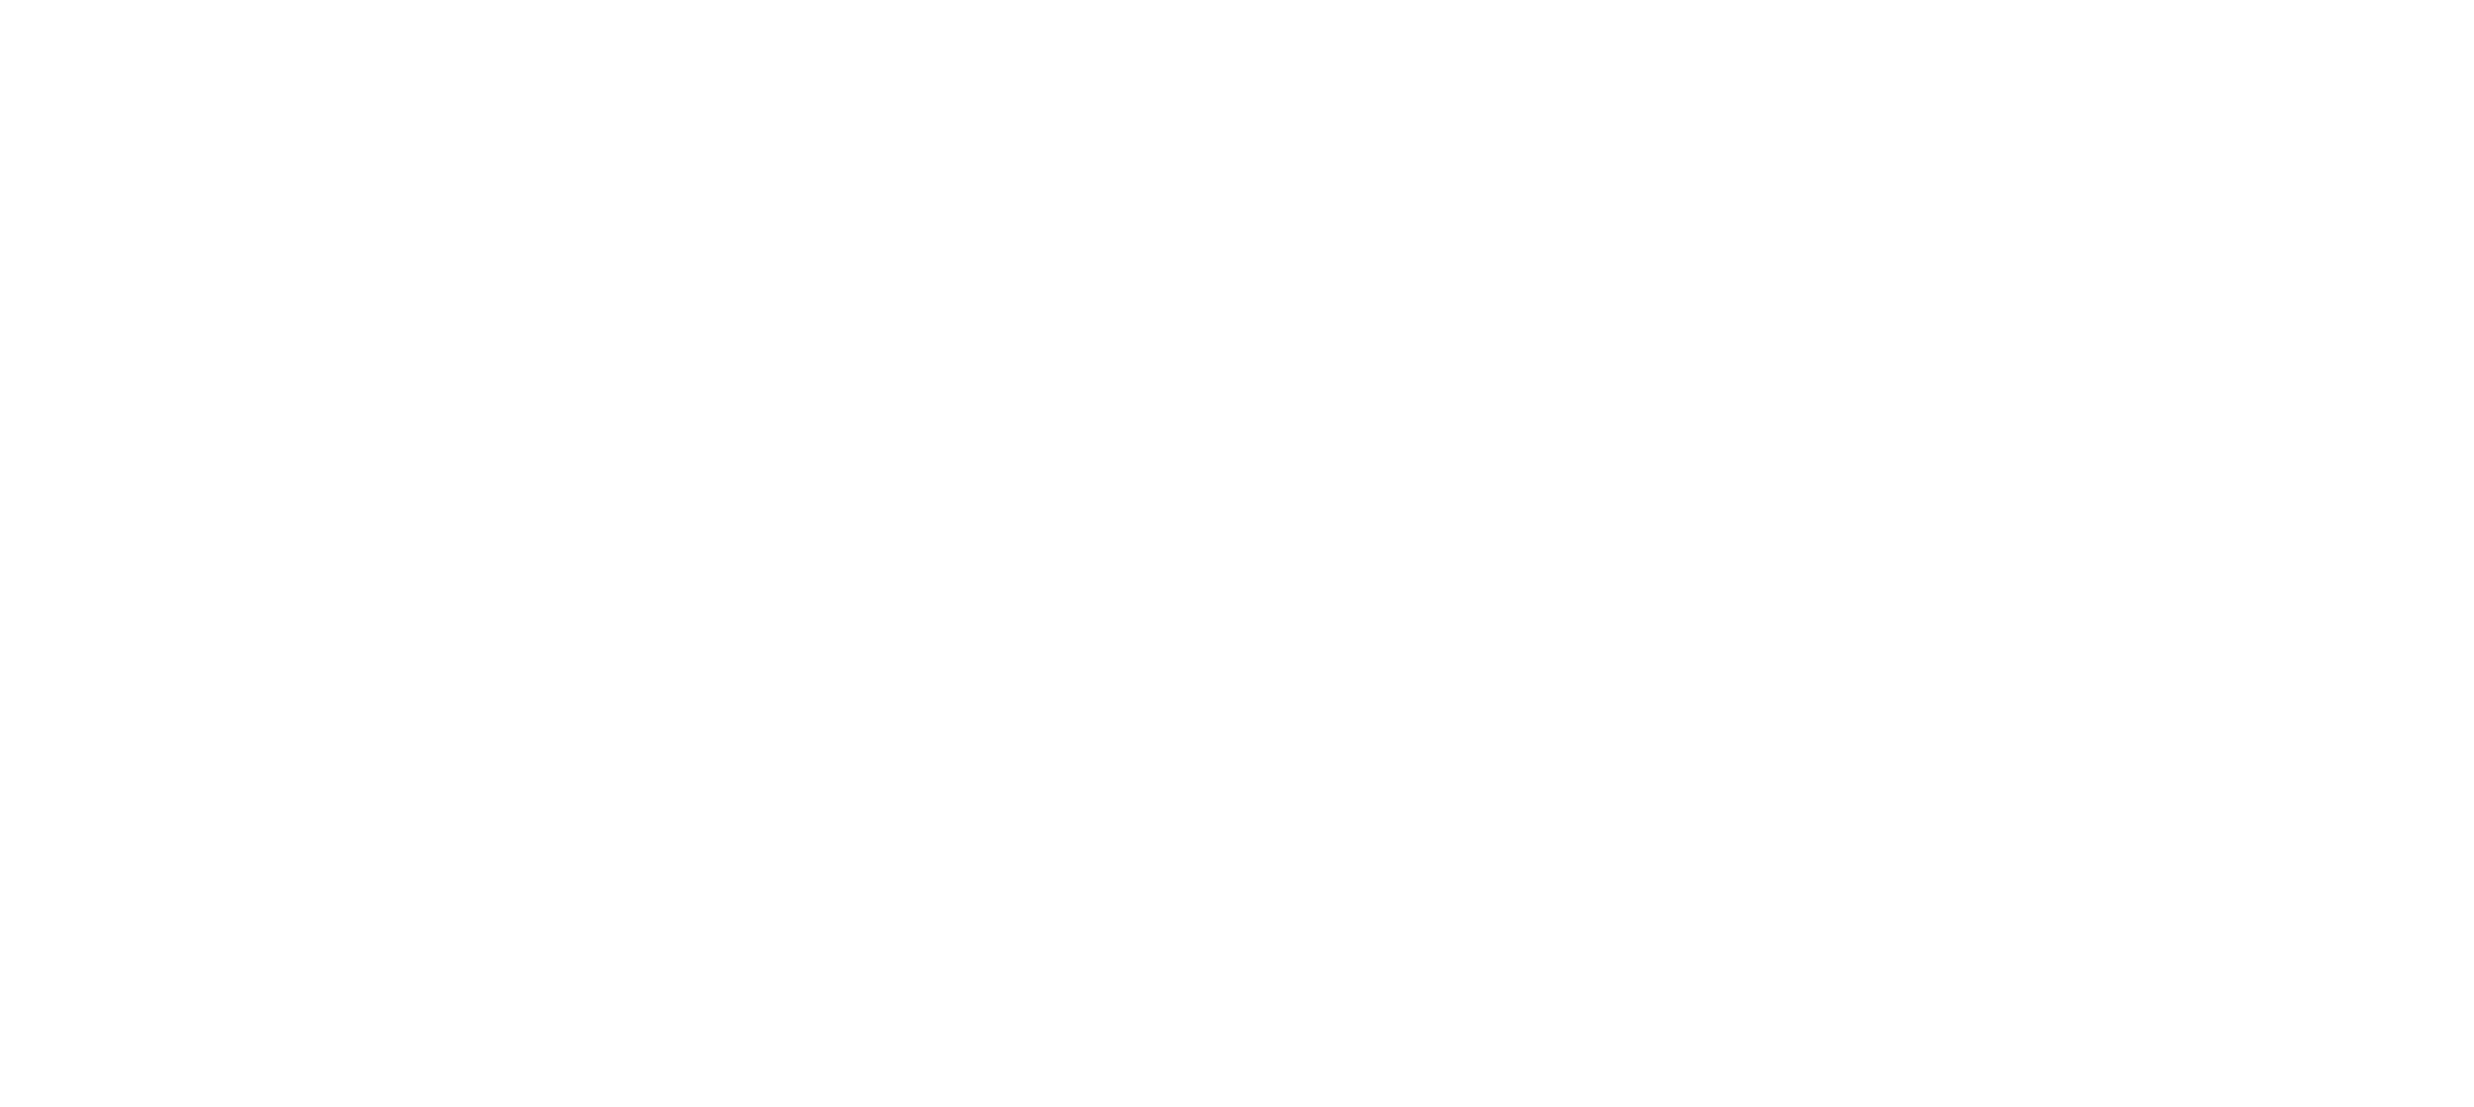 History of GE's HVDC